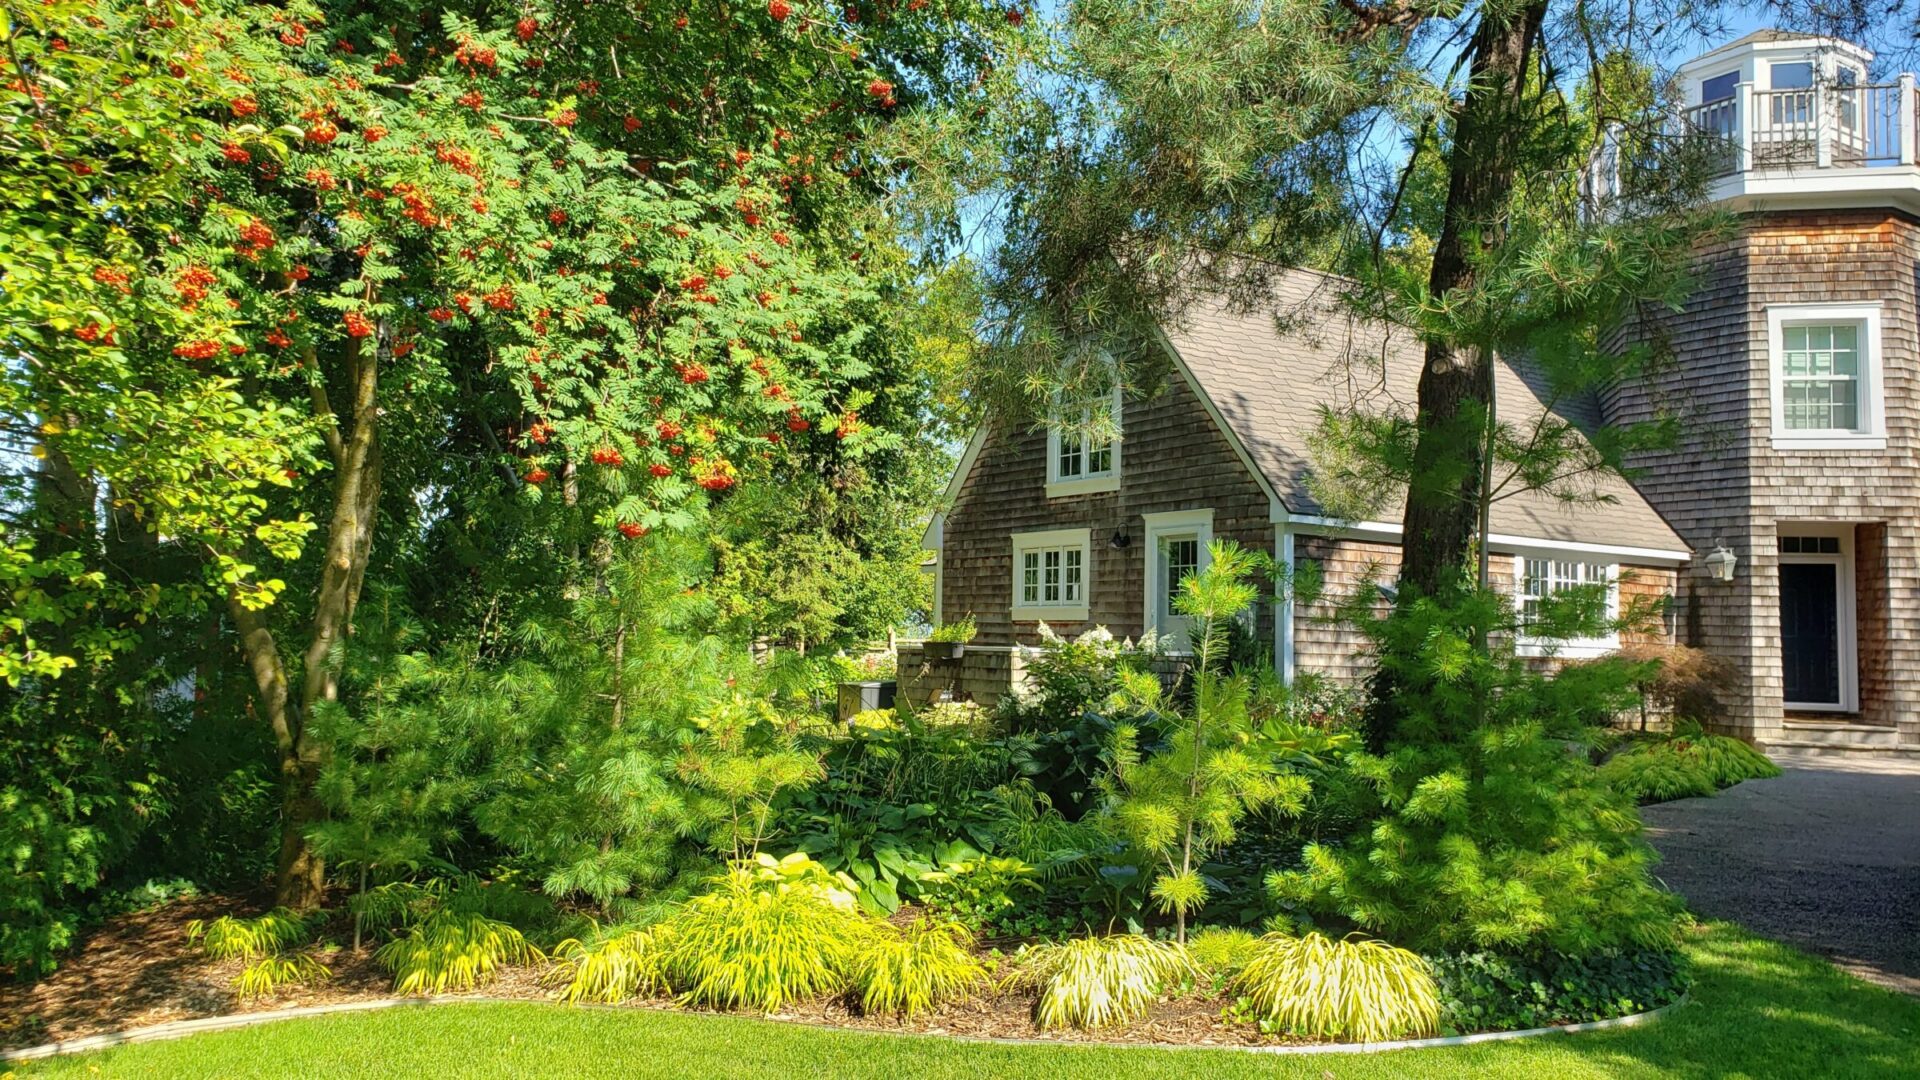 A charming house with cedar shingle siding is nestled among lush greenery and trees with red berries, under a clear blue sky.